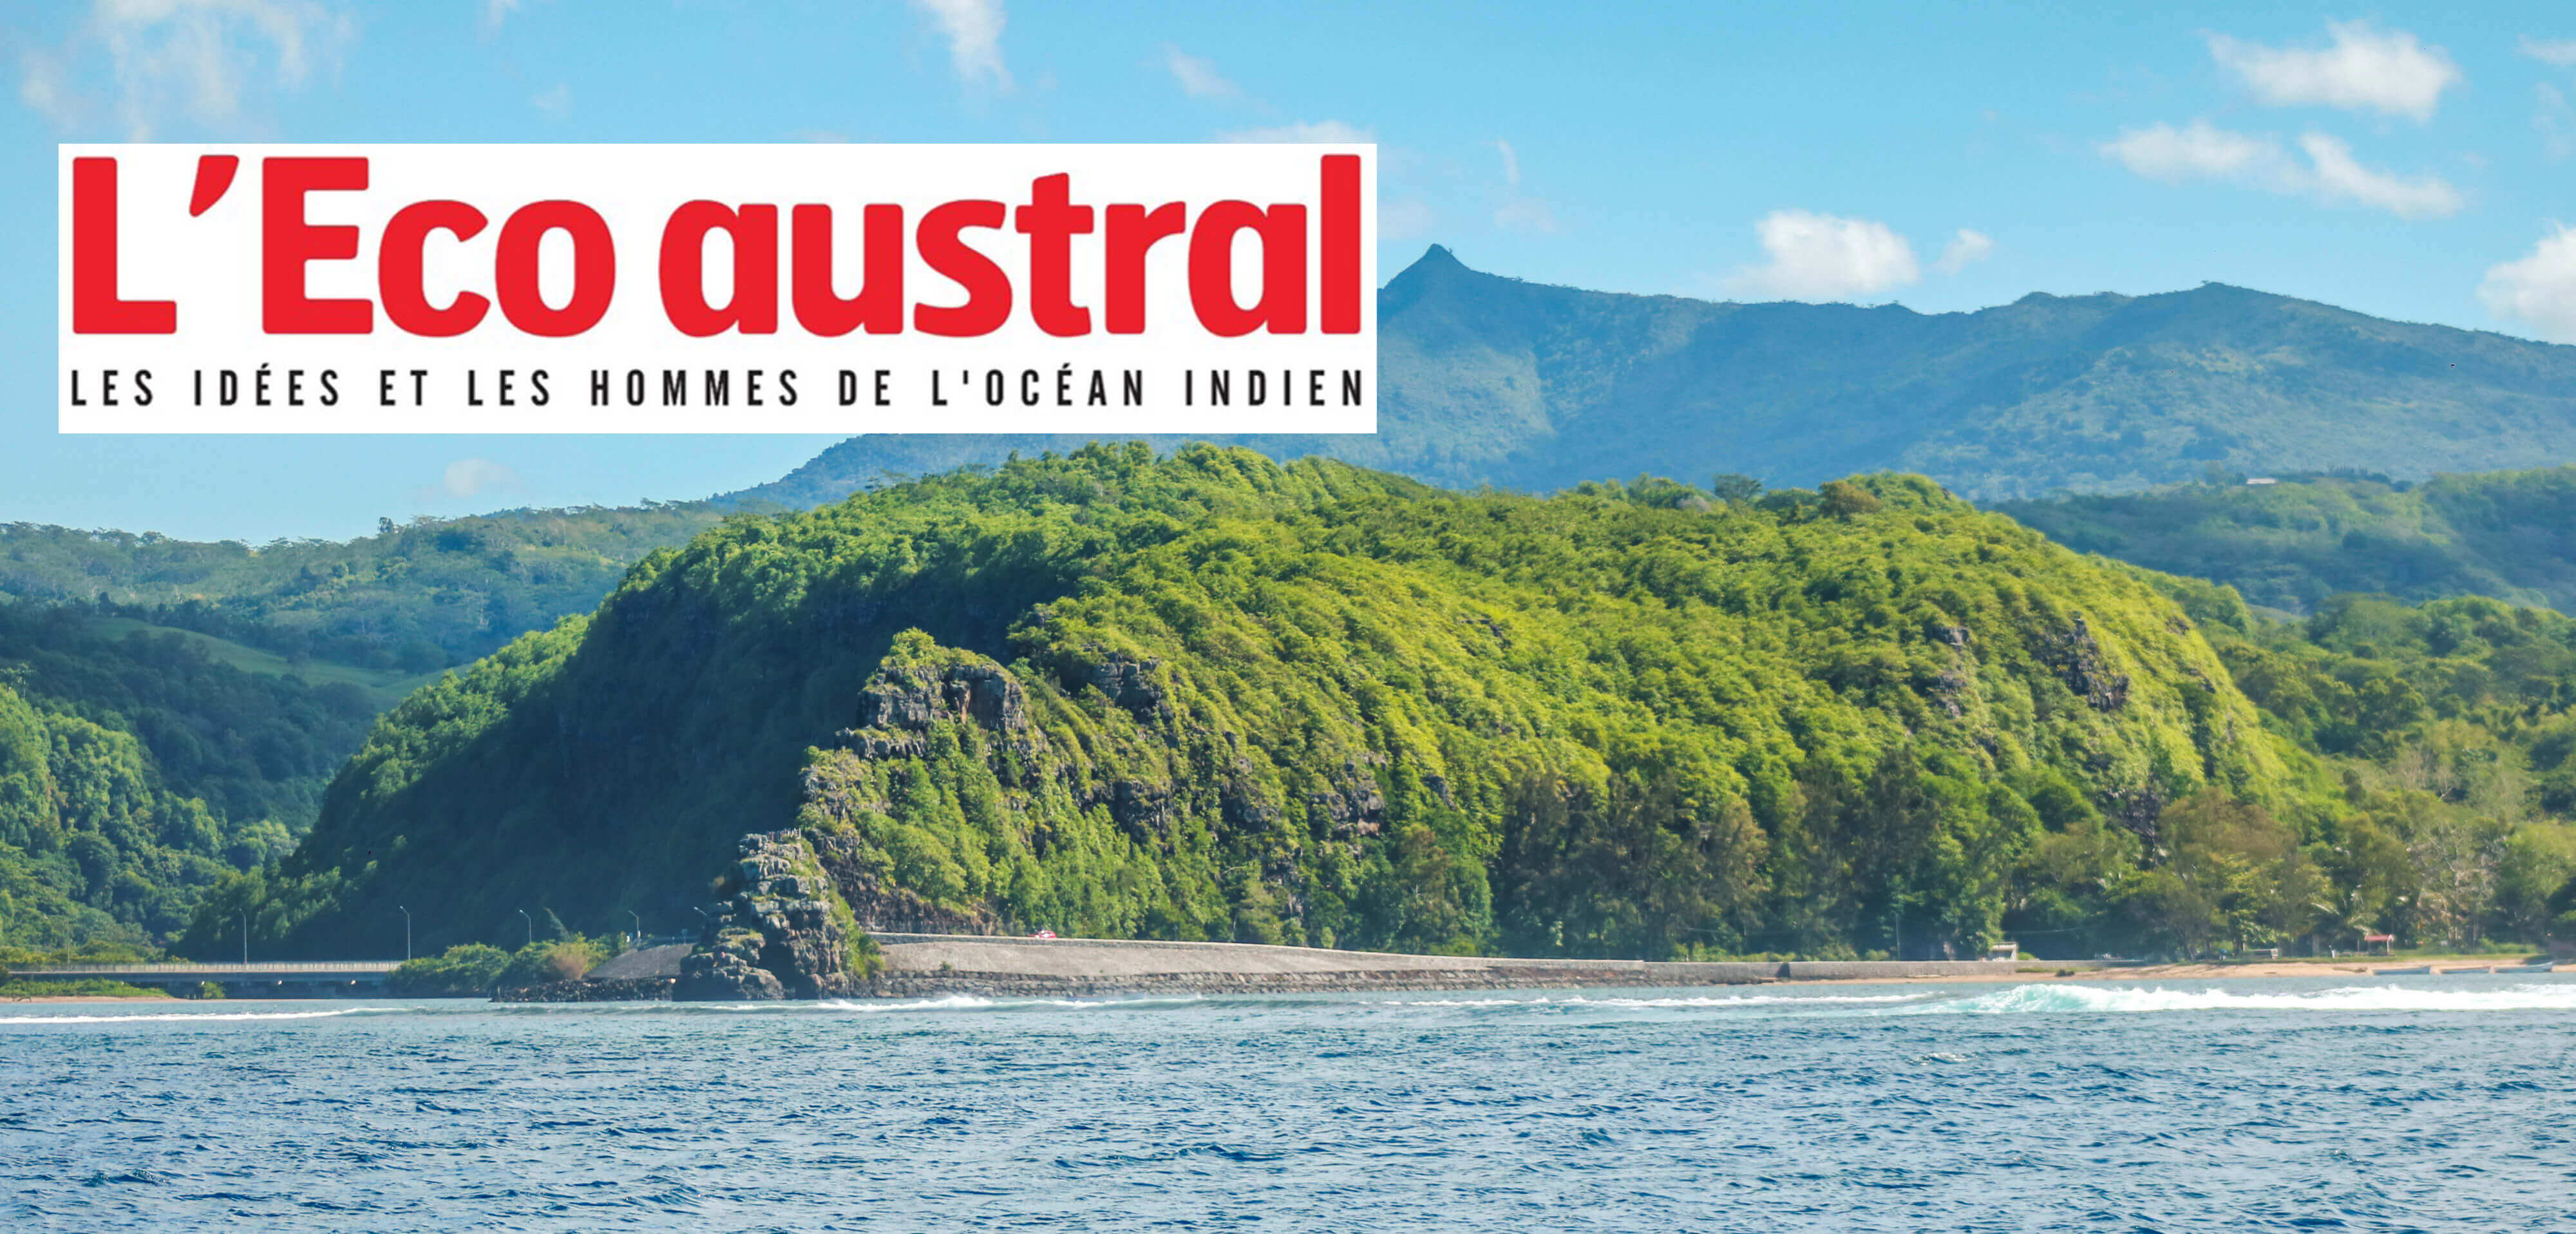 L'ECO AUSTRAL for ANBALABA